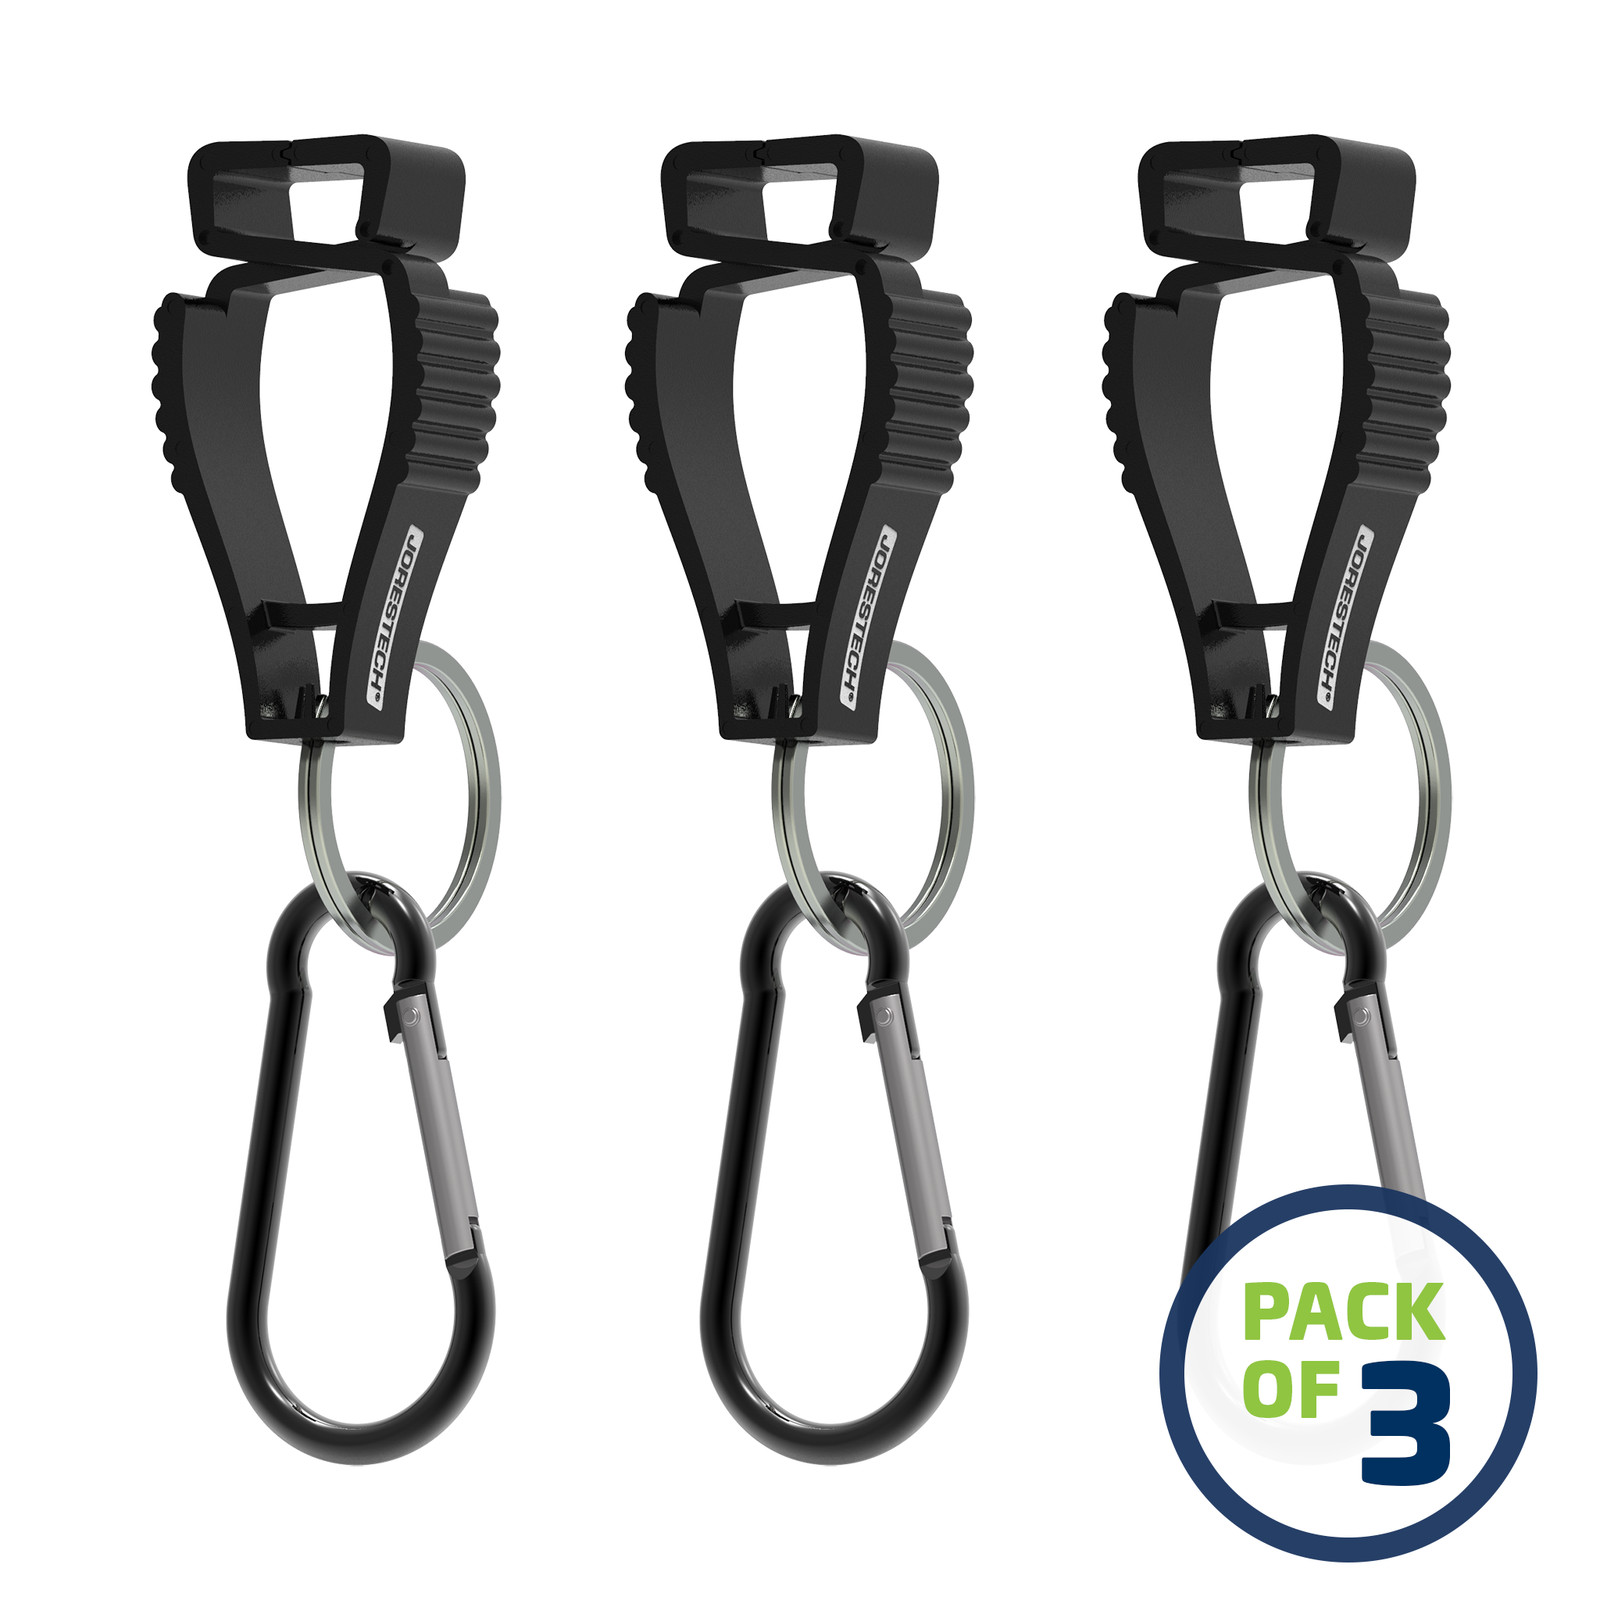 Pack of 3 Black JORESTECH glove clip safety holders with carabiner 